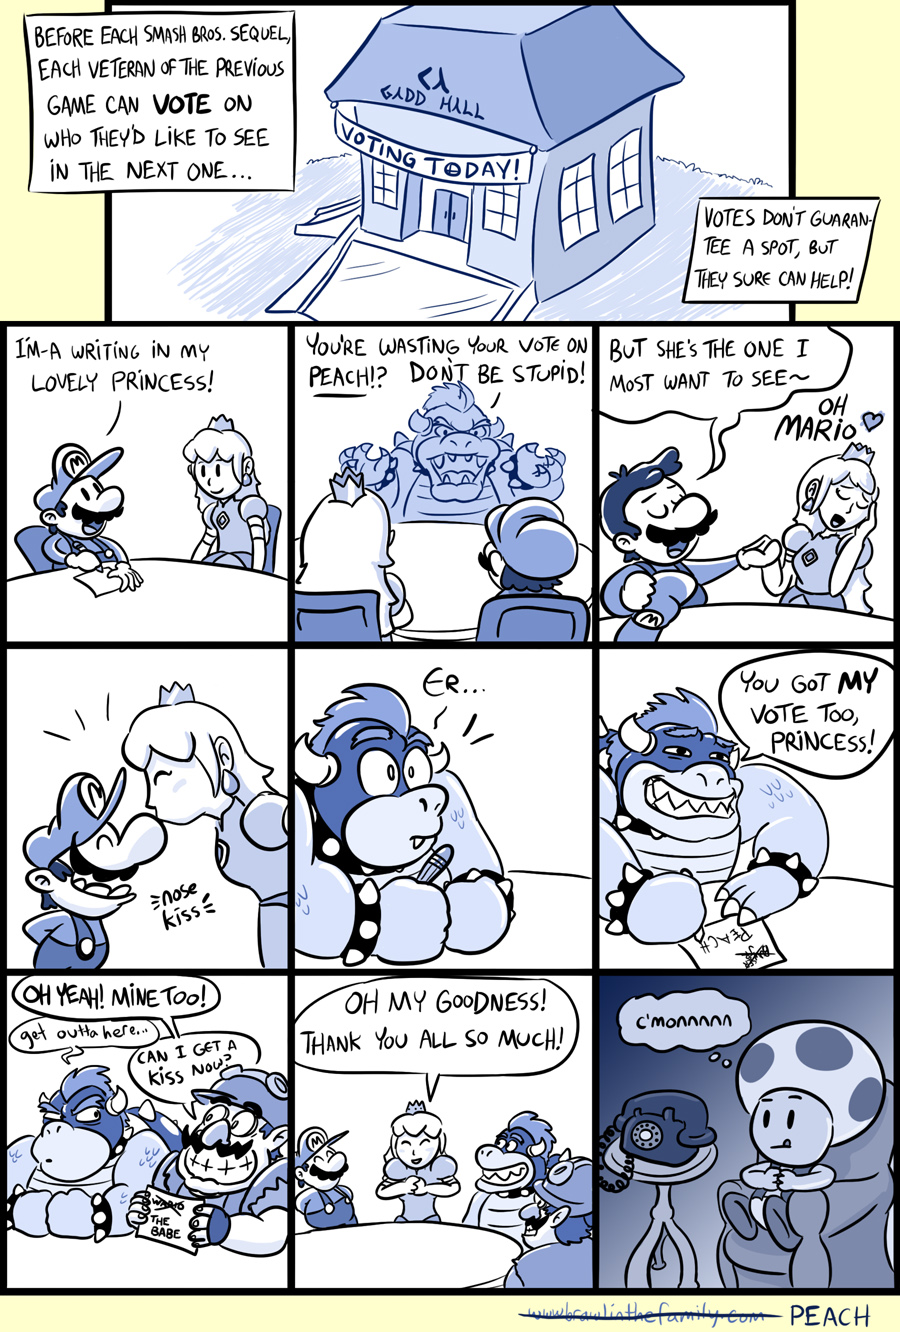 Don't worry, Toad, you'll always have a place in Smash Bros: concealed within Peach's dress!